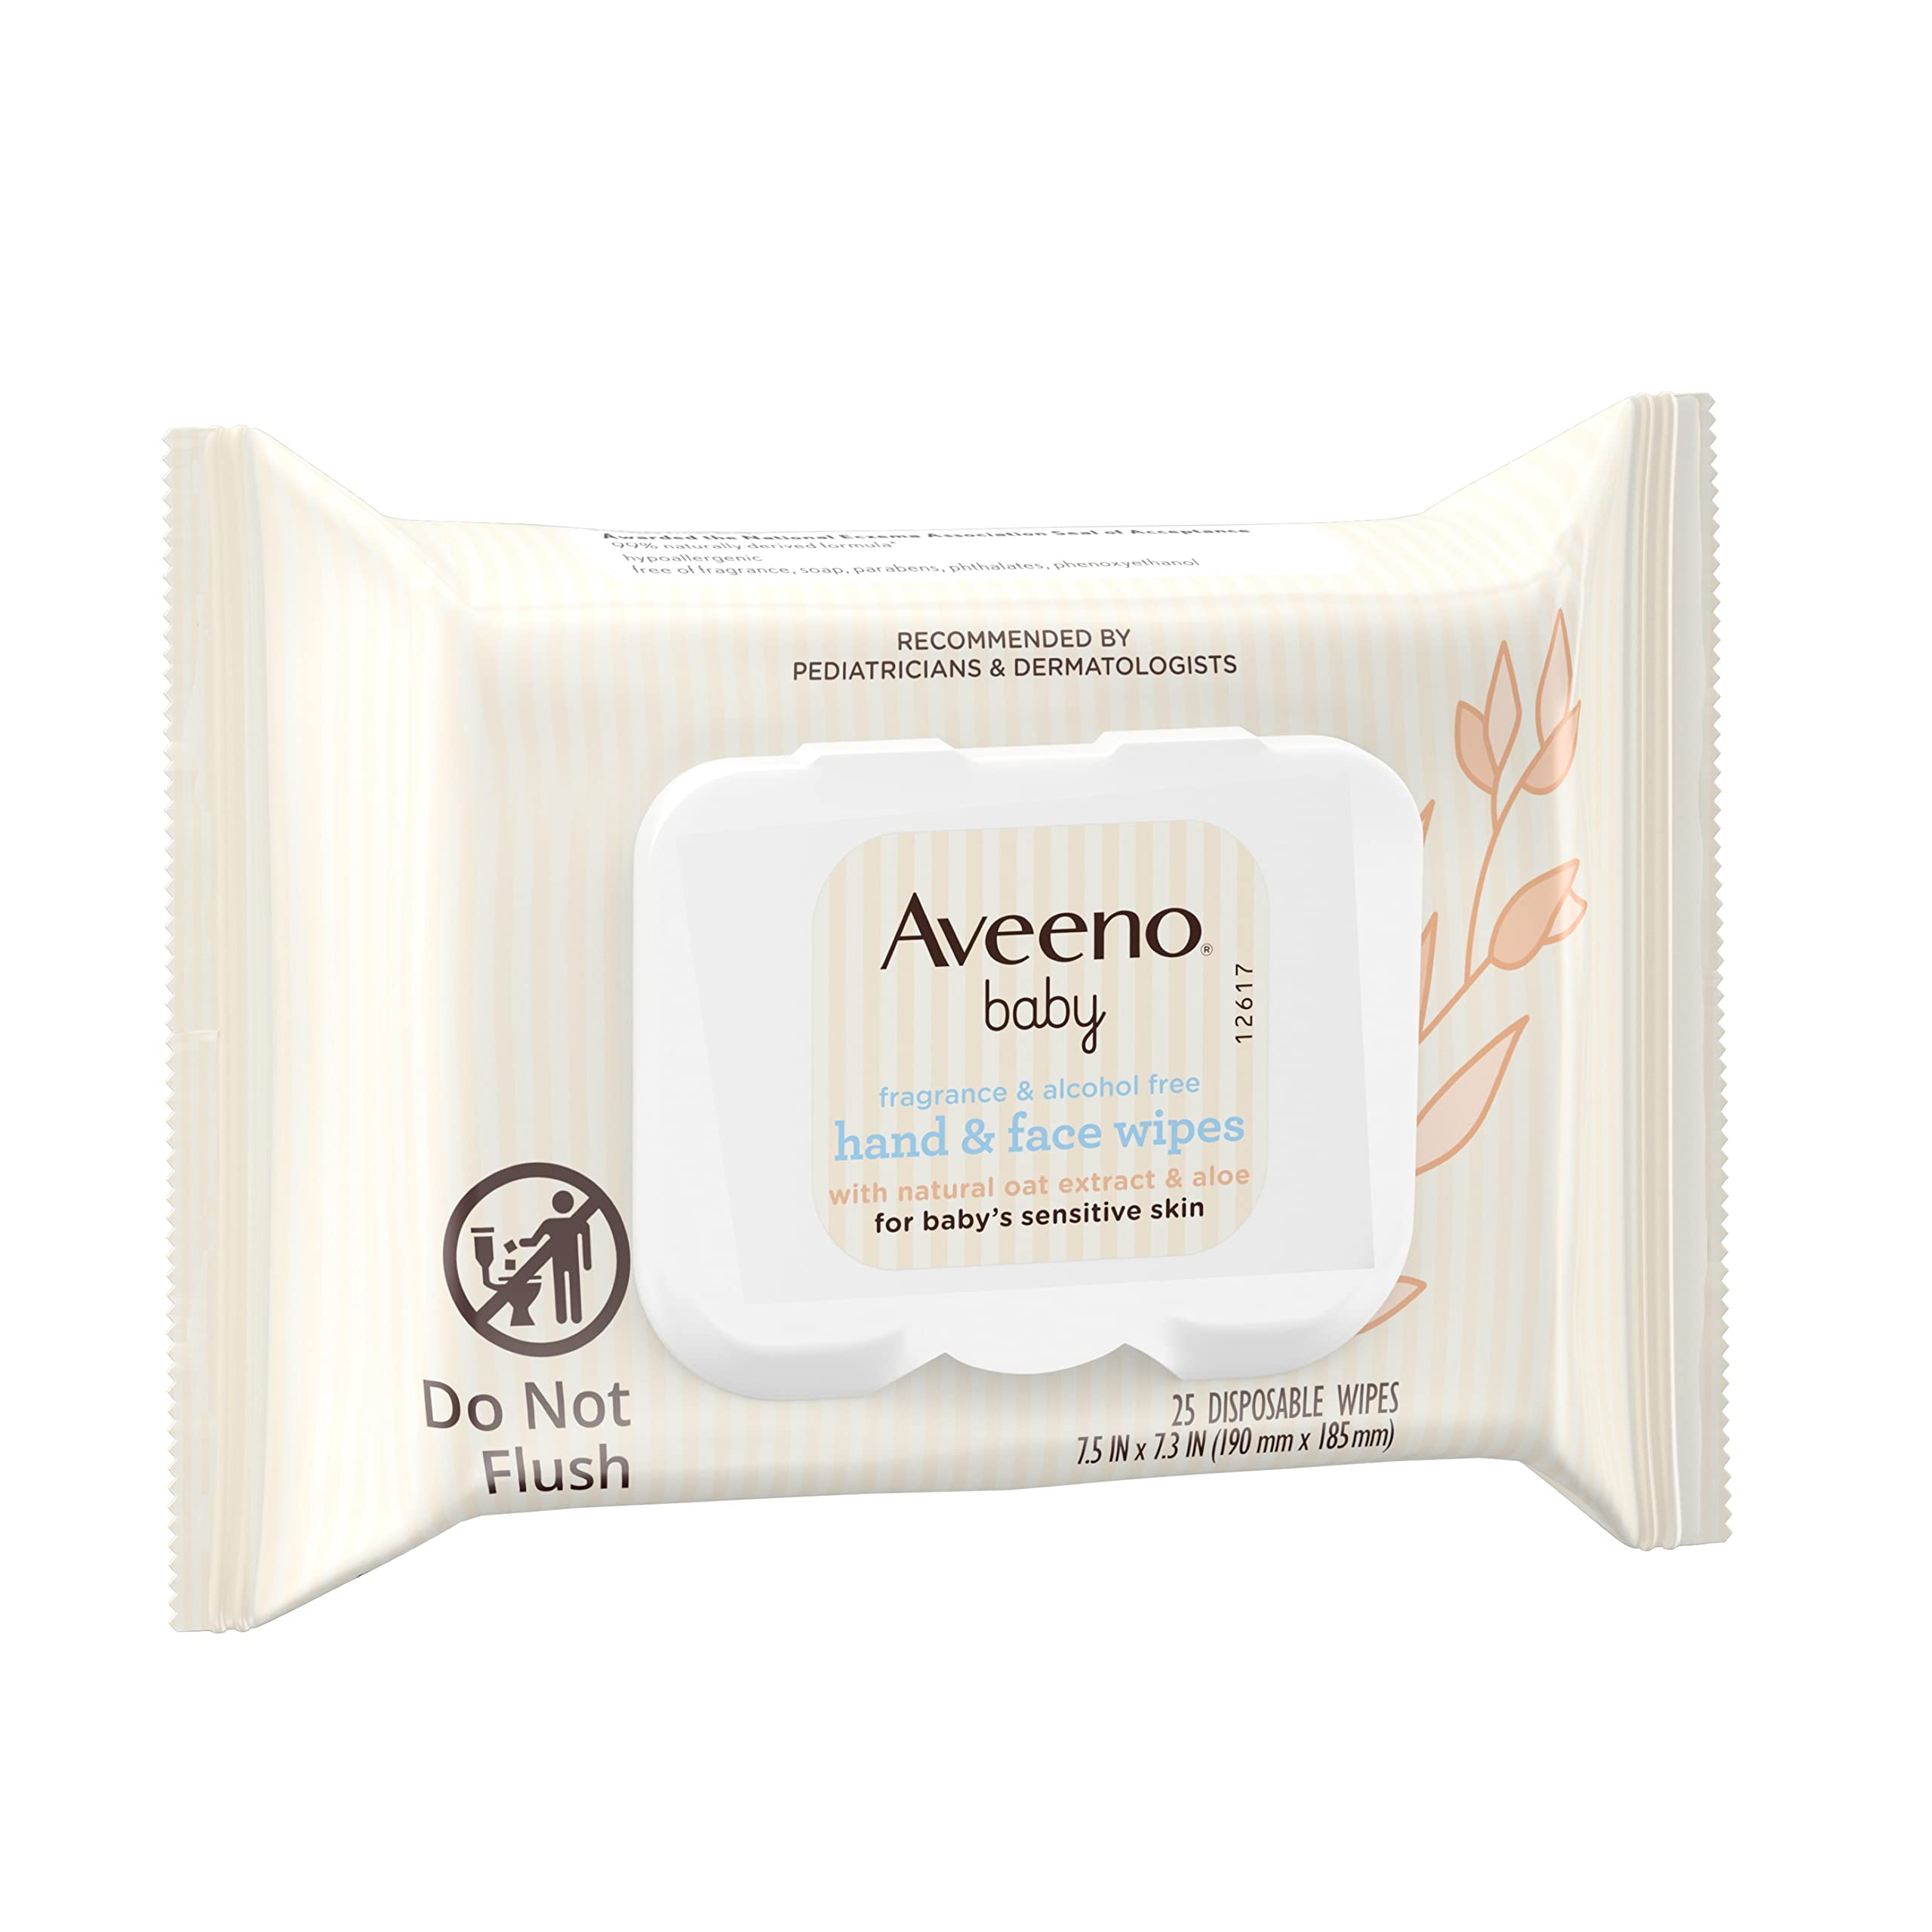 Aveeno Baby Fragrance Free Hand & Face Wipes with Oat Extract & Aloe, Cleansing & Moisturizing Baby Wipes for Sensitive Skin, Sulfate-, Alcohol-, & Paraben-Free, Hypoallergenic, 25 ct